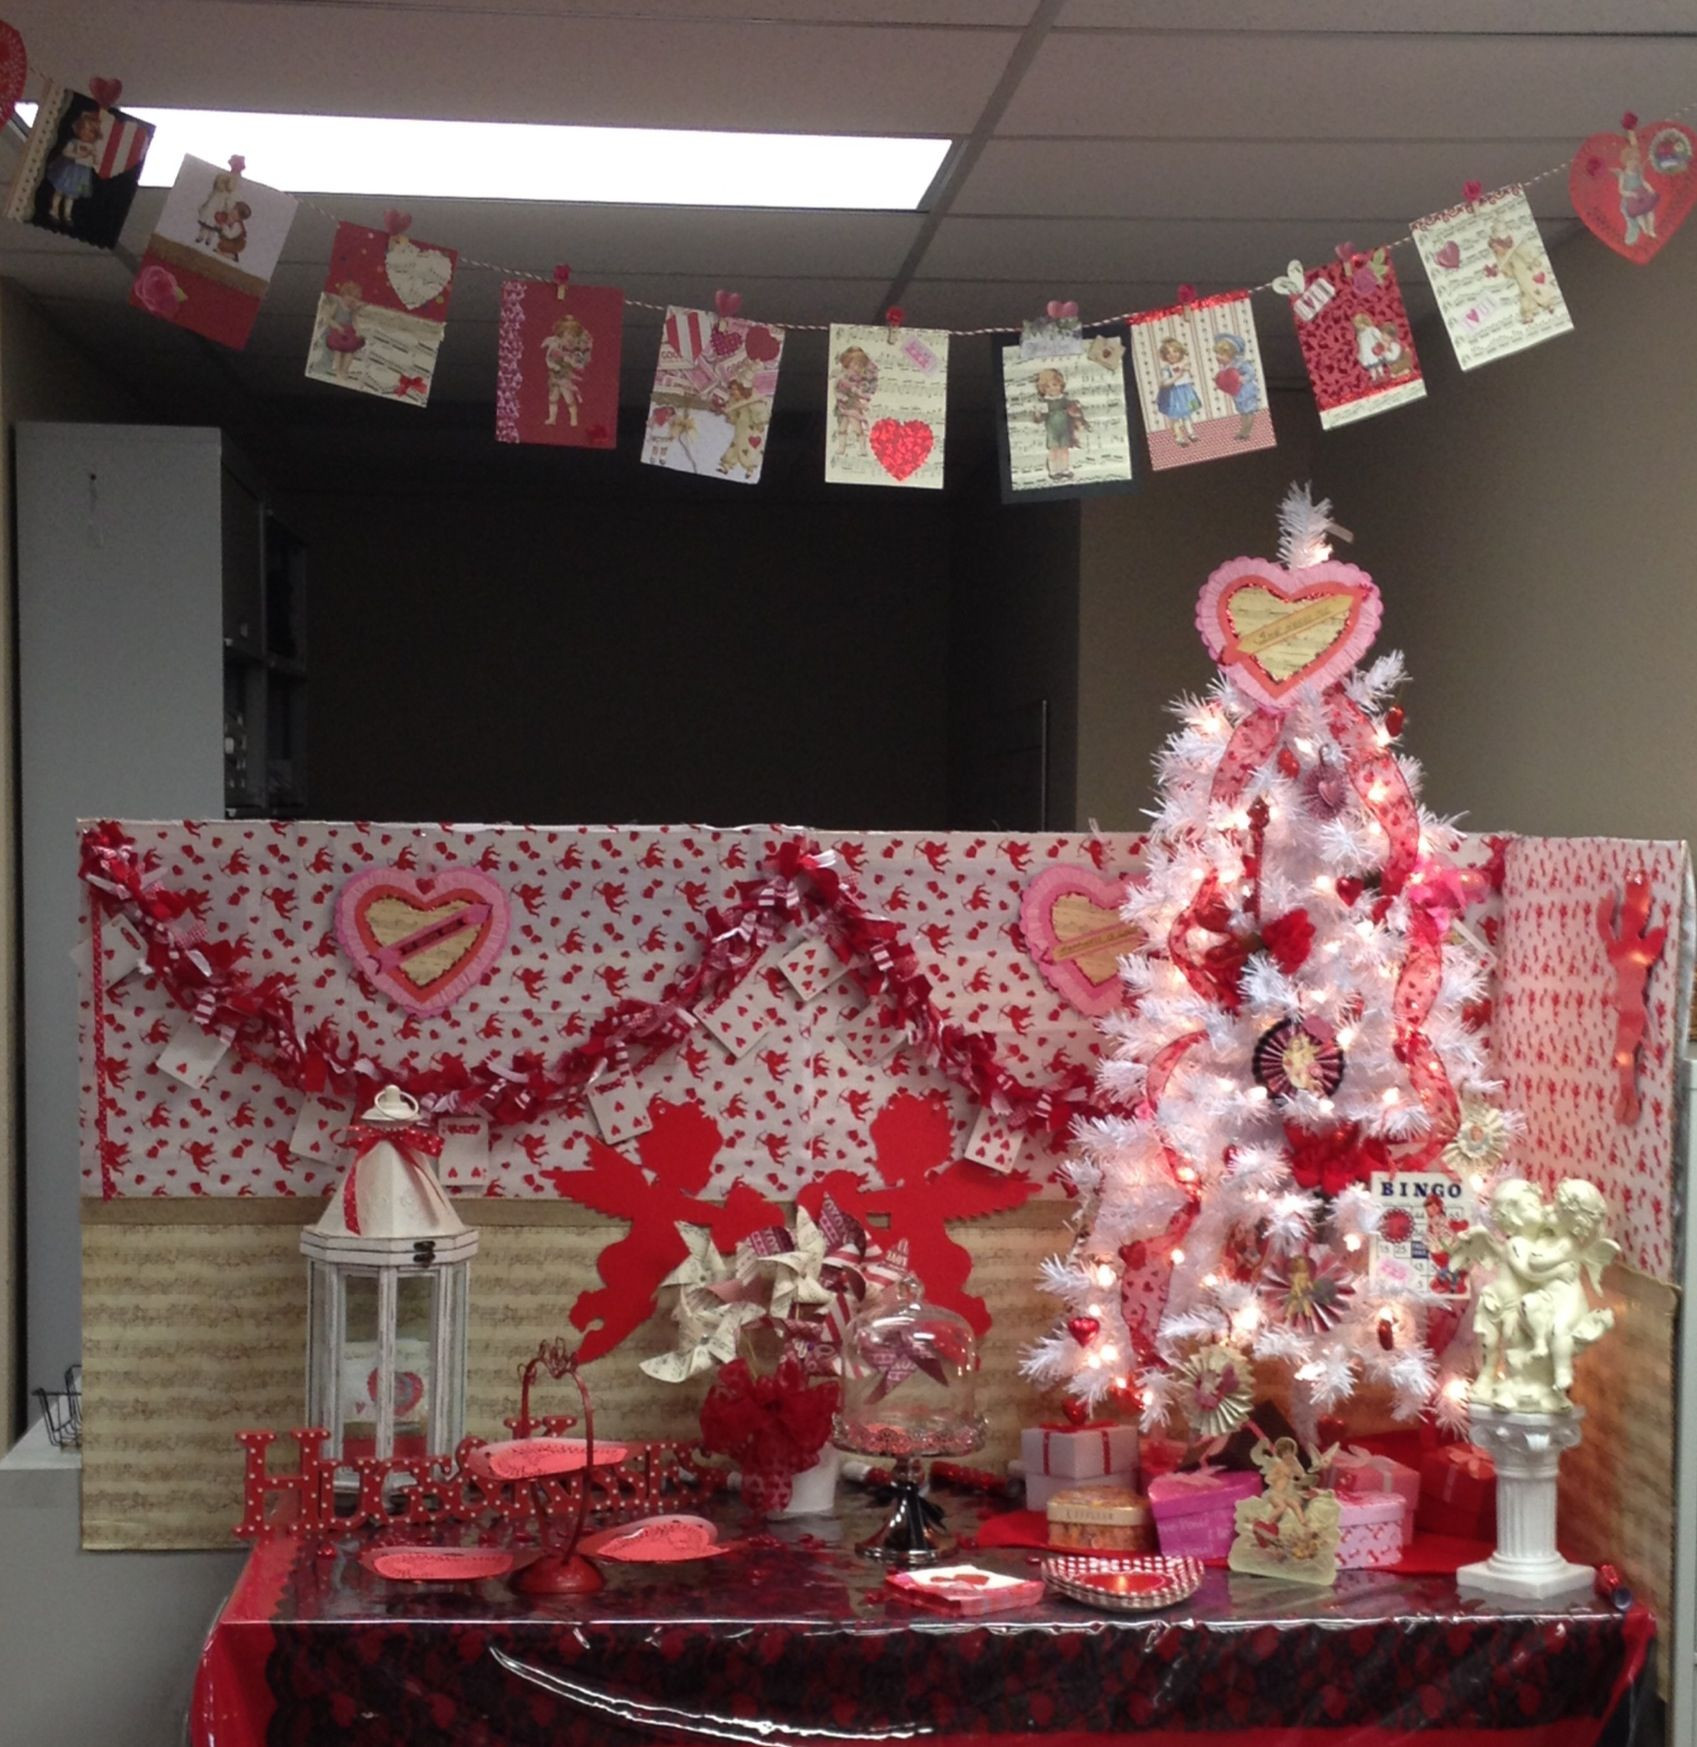 Office Valentines Day Ideas
 My office potluck decorations Thank you Pinterest for the